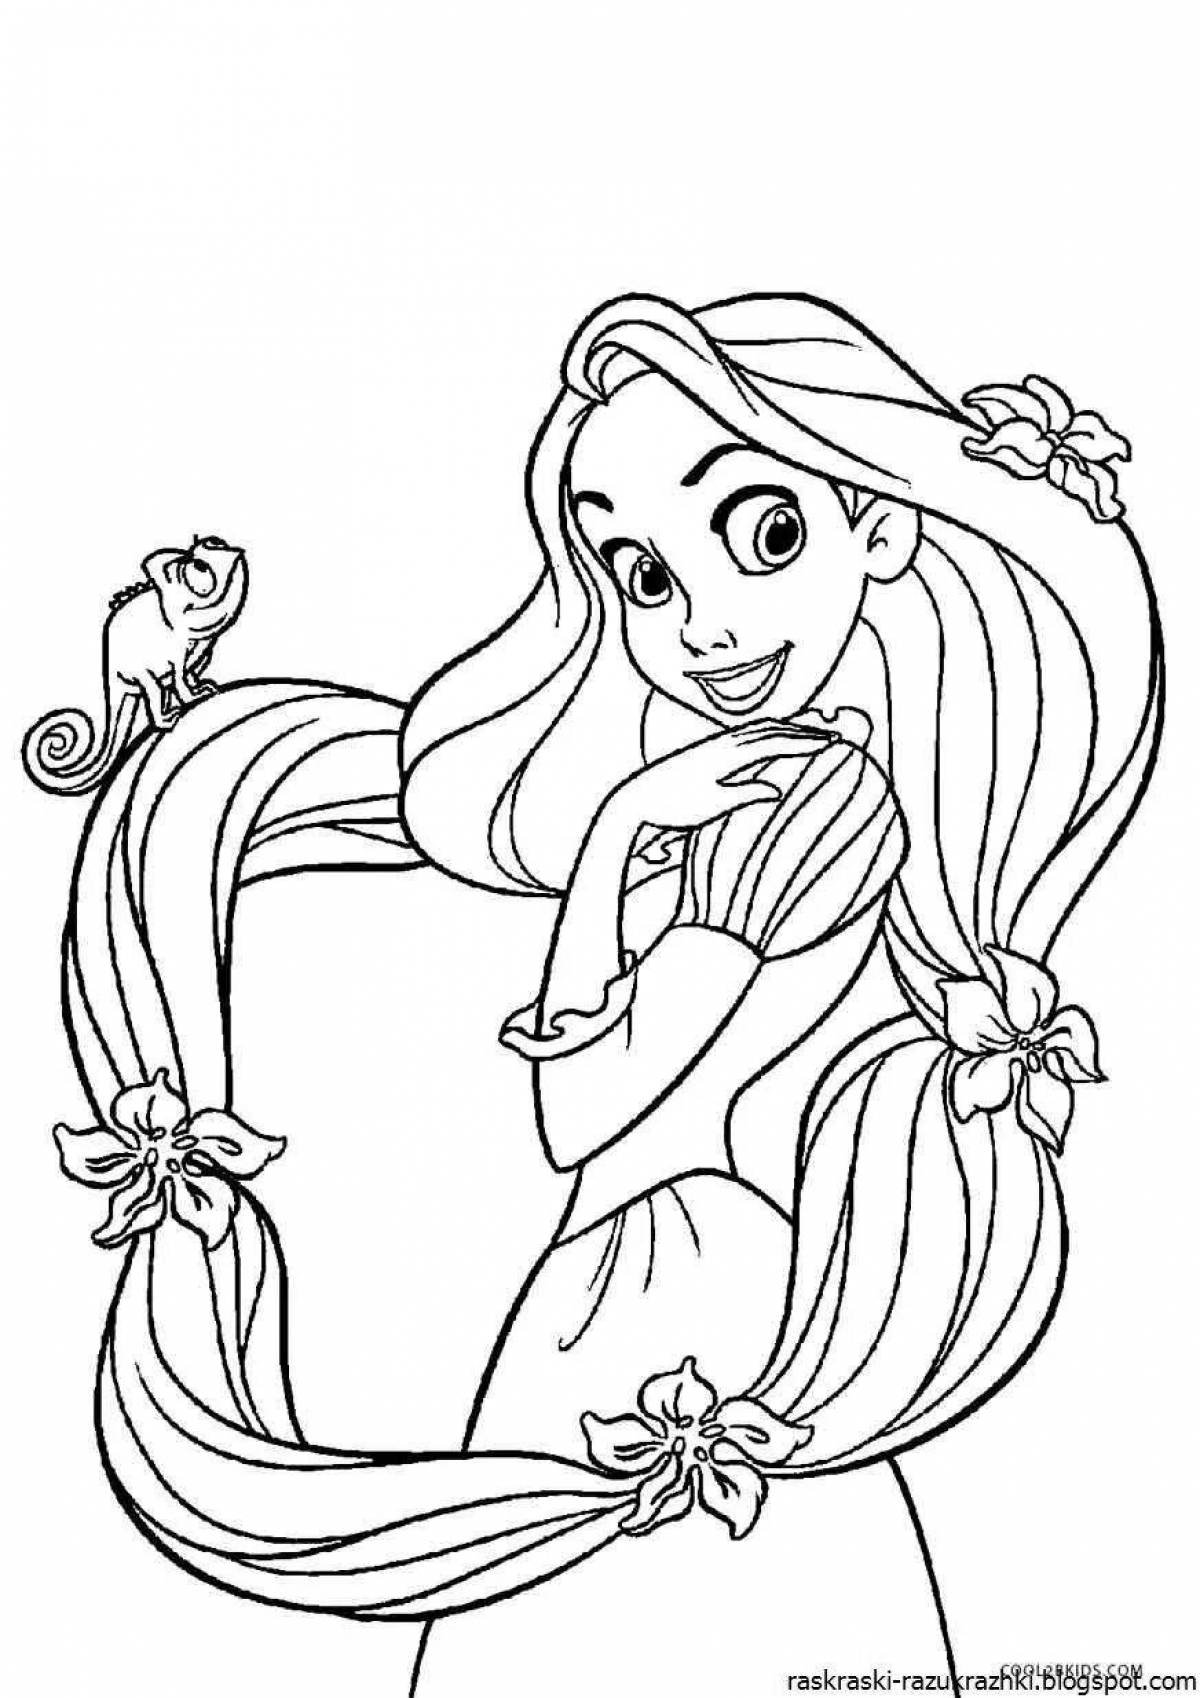 Radiant coloring page rapunzel game